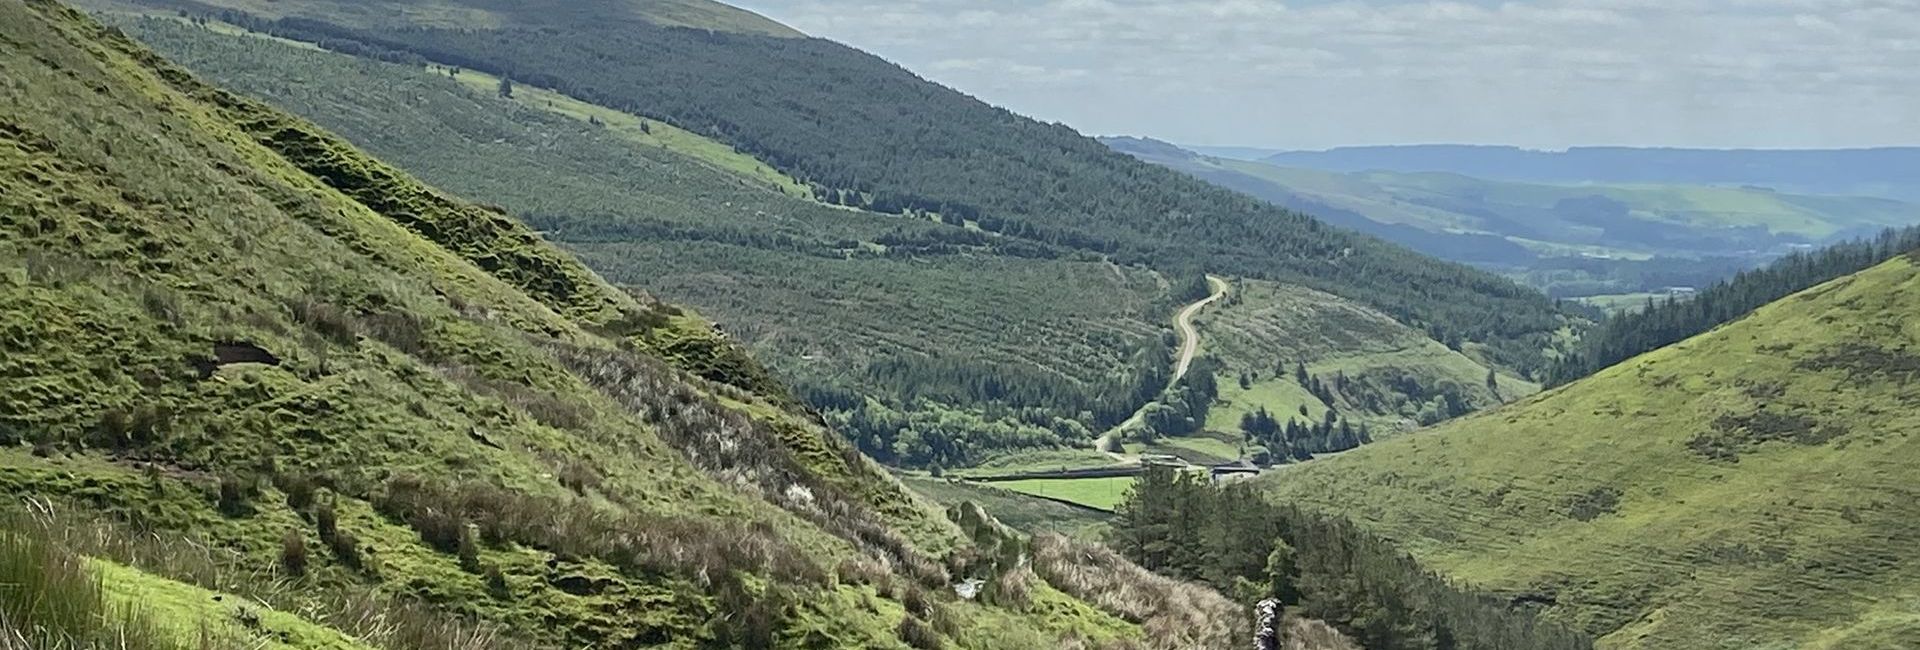 Green mountains near the Inn at Whitewell, Forest of Bowland, Lancashire